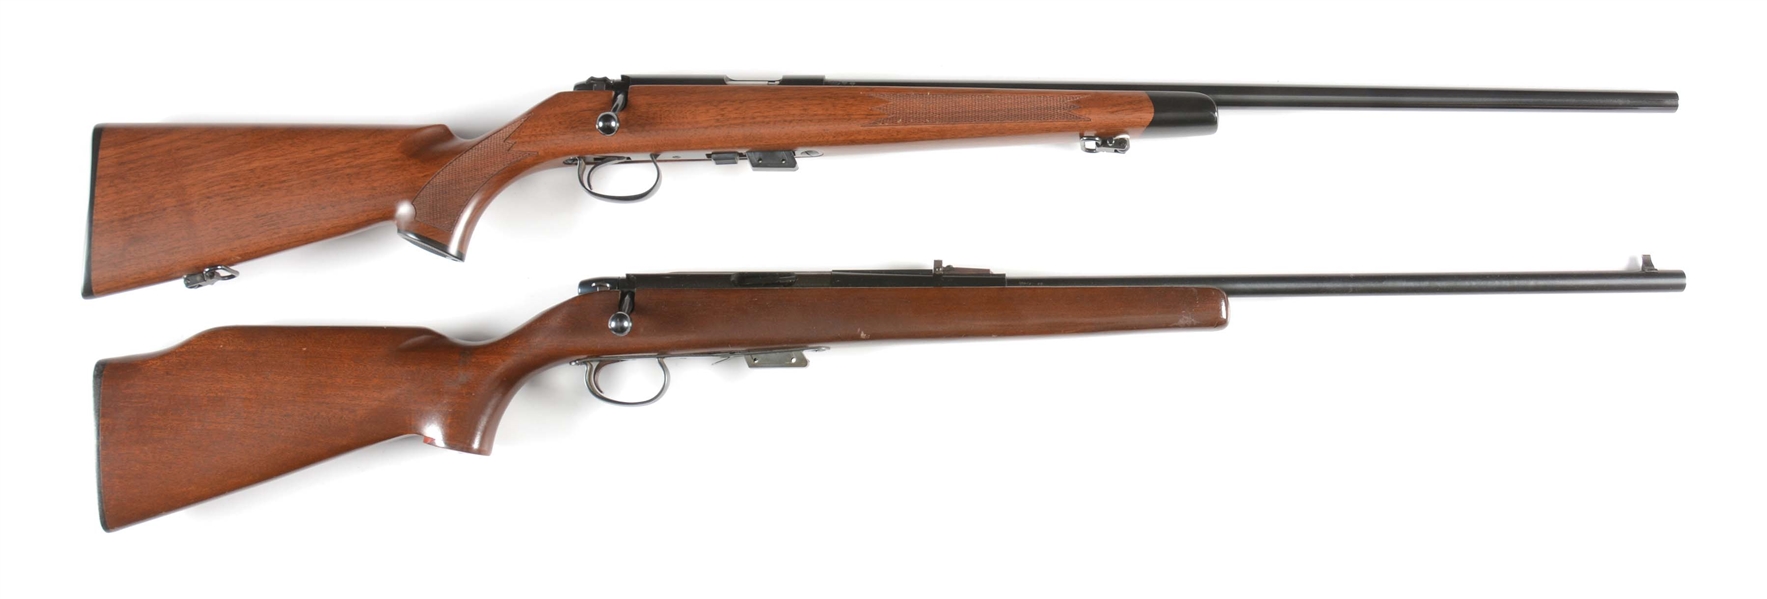 (M) LOT OF TWO: REMINGTON 541 AND 591 BOLT ACTION RIFLES.